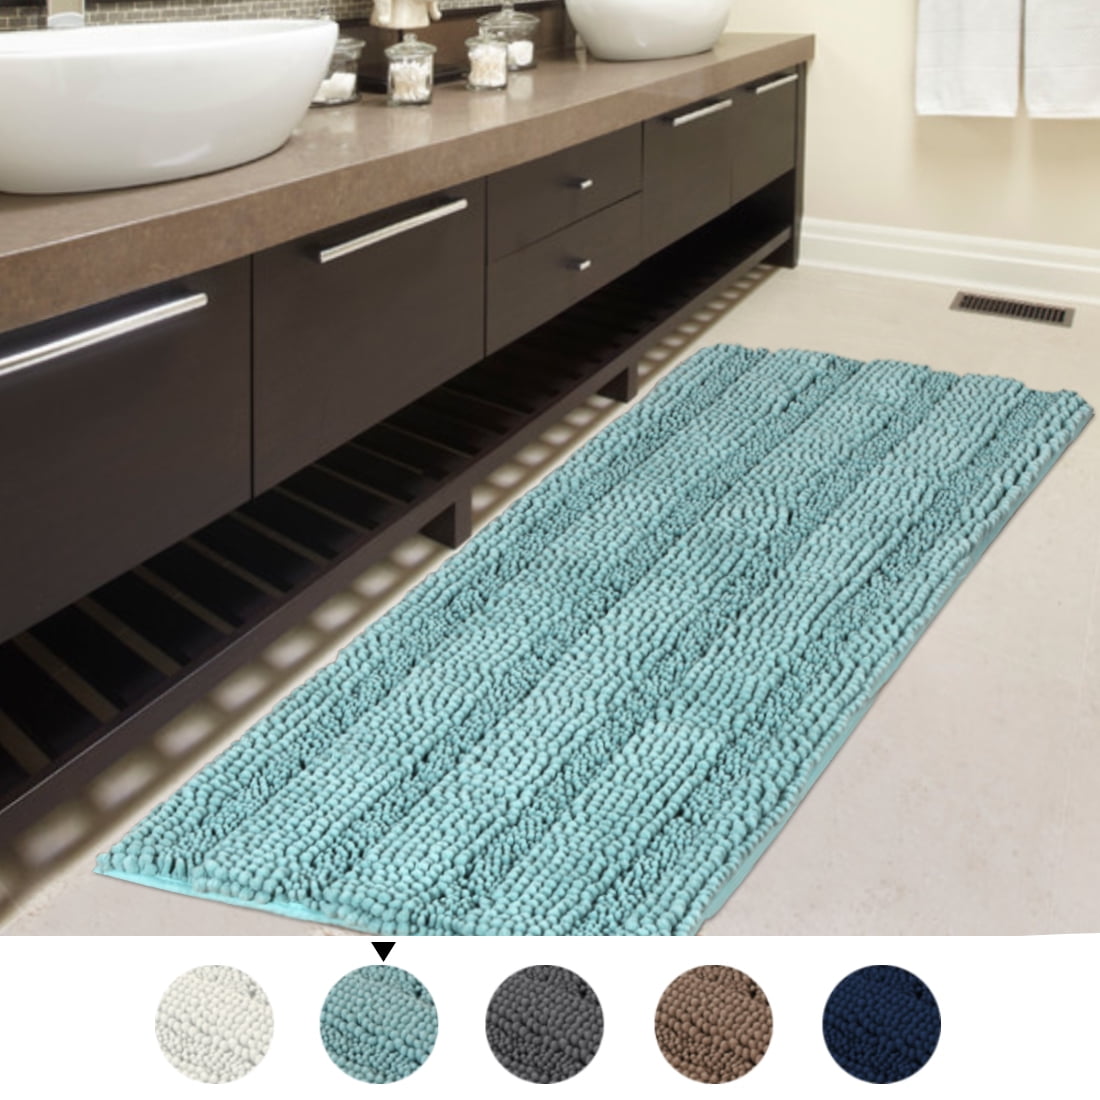  Stiio Large Bath Mat Rug17x43 inches, Super Absorbent Quick Dry Bathroom  Rugs Non-Slip, Thin Kitchen Mats That Fit Under Door, Long Washable Floor  Mats for Livingroom, Shower Mat for Tub, Sink